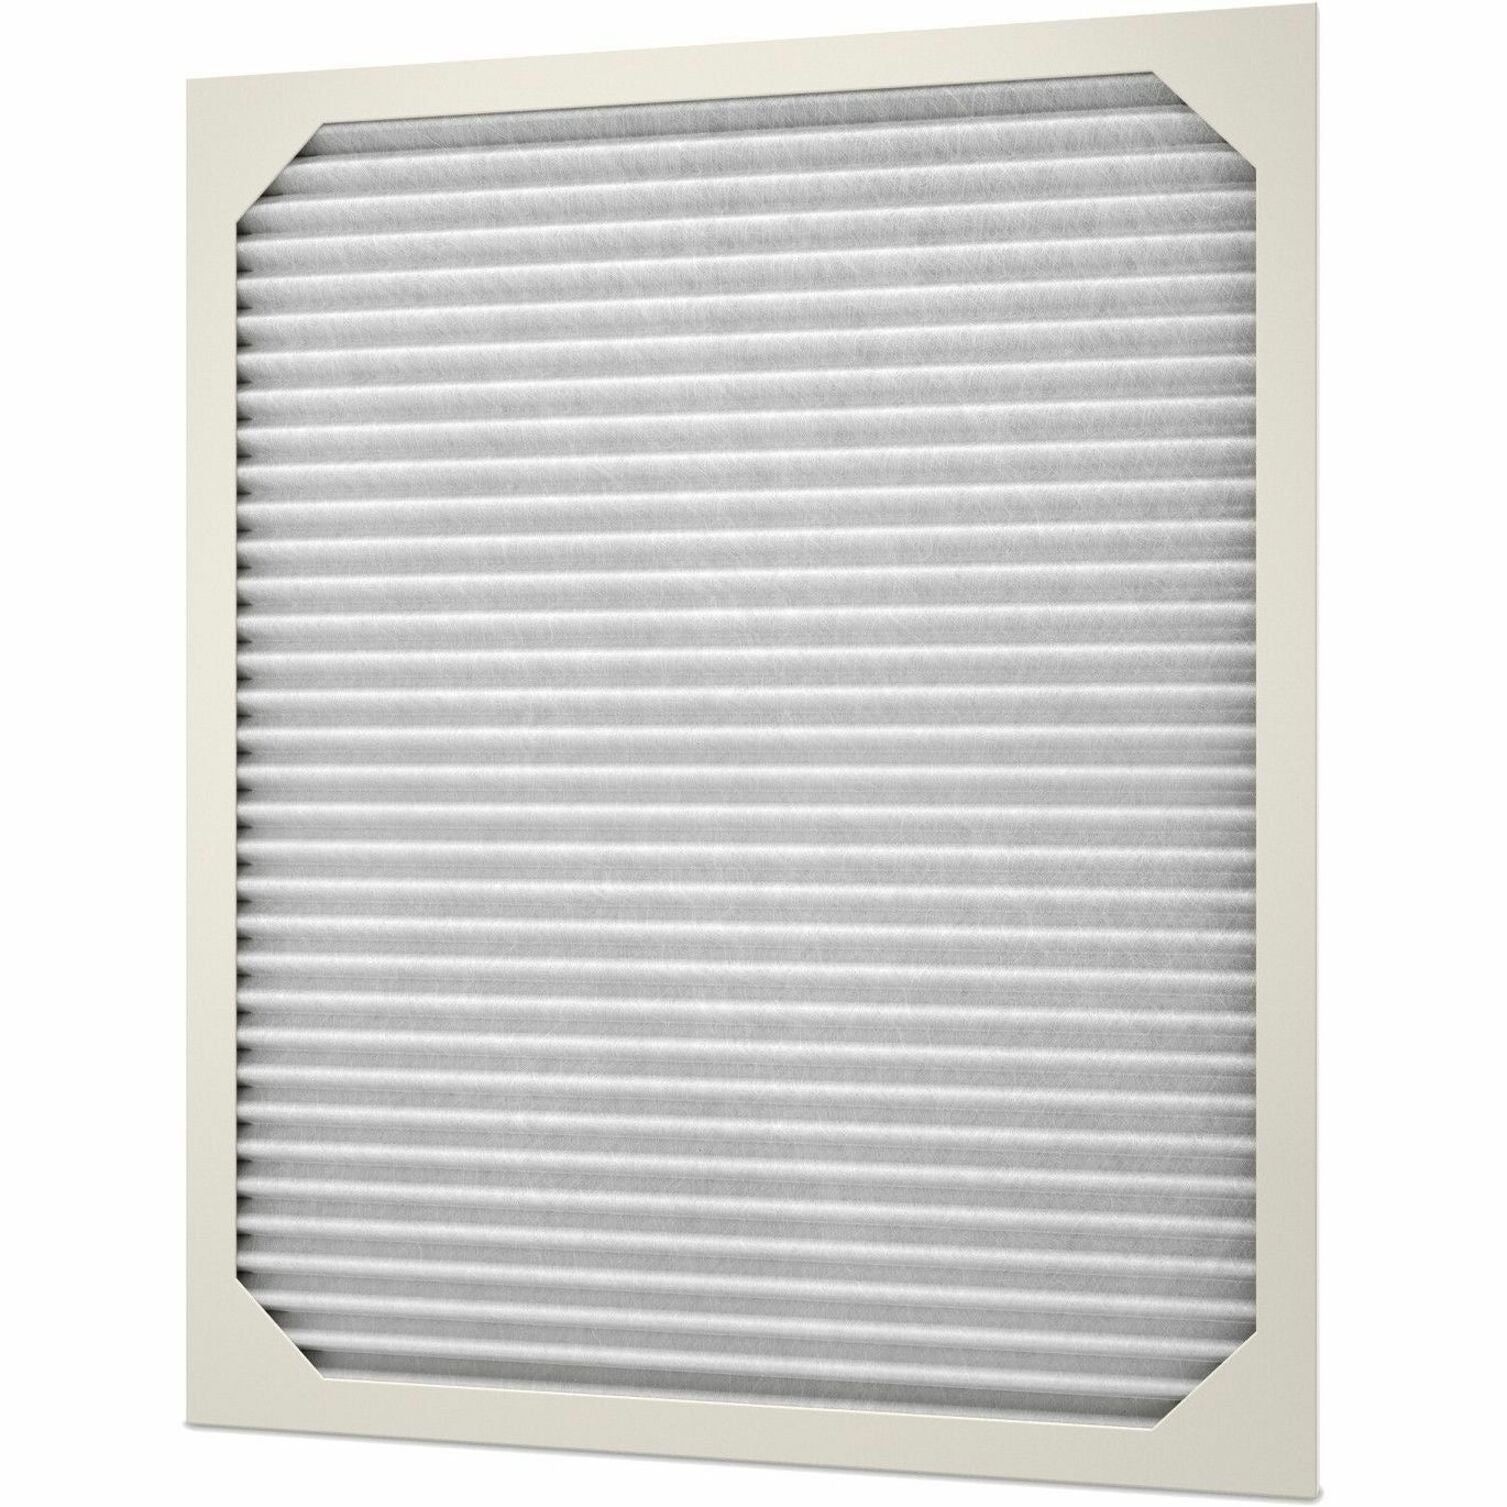 APC Galaxy VS Air Filter Kit for 521mm wide UPS - 1 Pack (GVSOPT001)